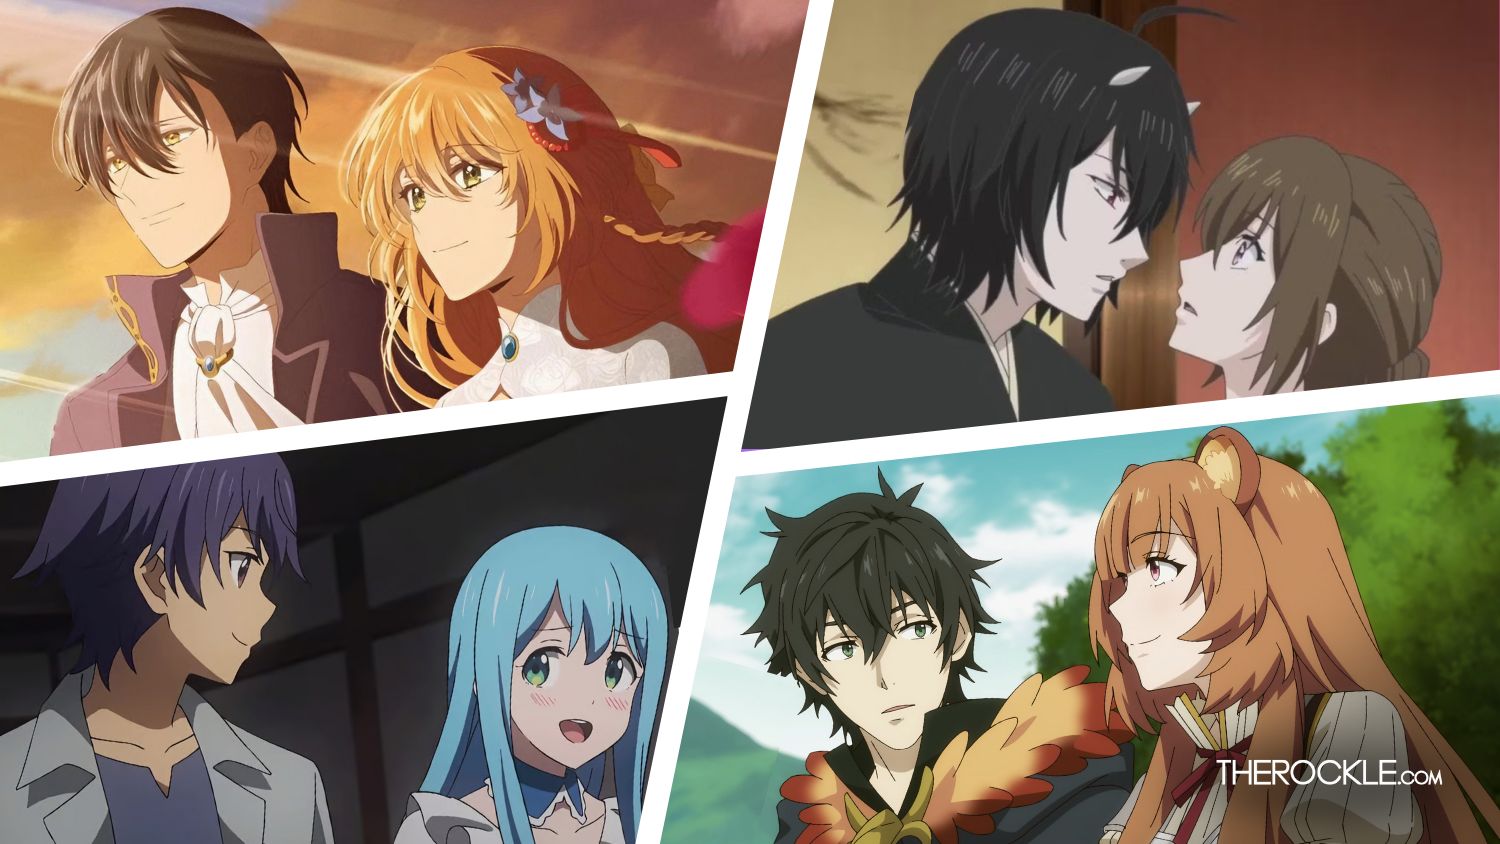 13 Isekai Romance Anime That’ll Have You Shipping Across Dimensions!